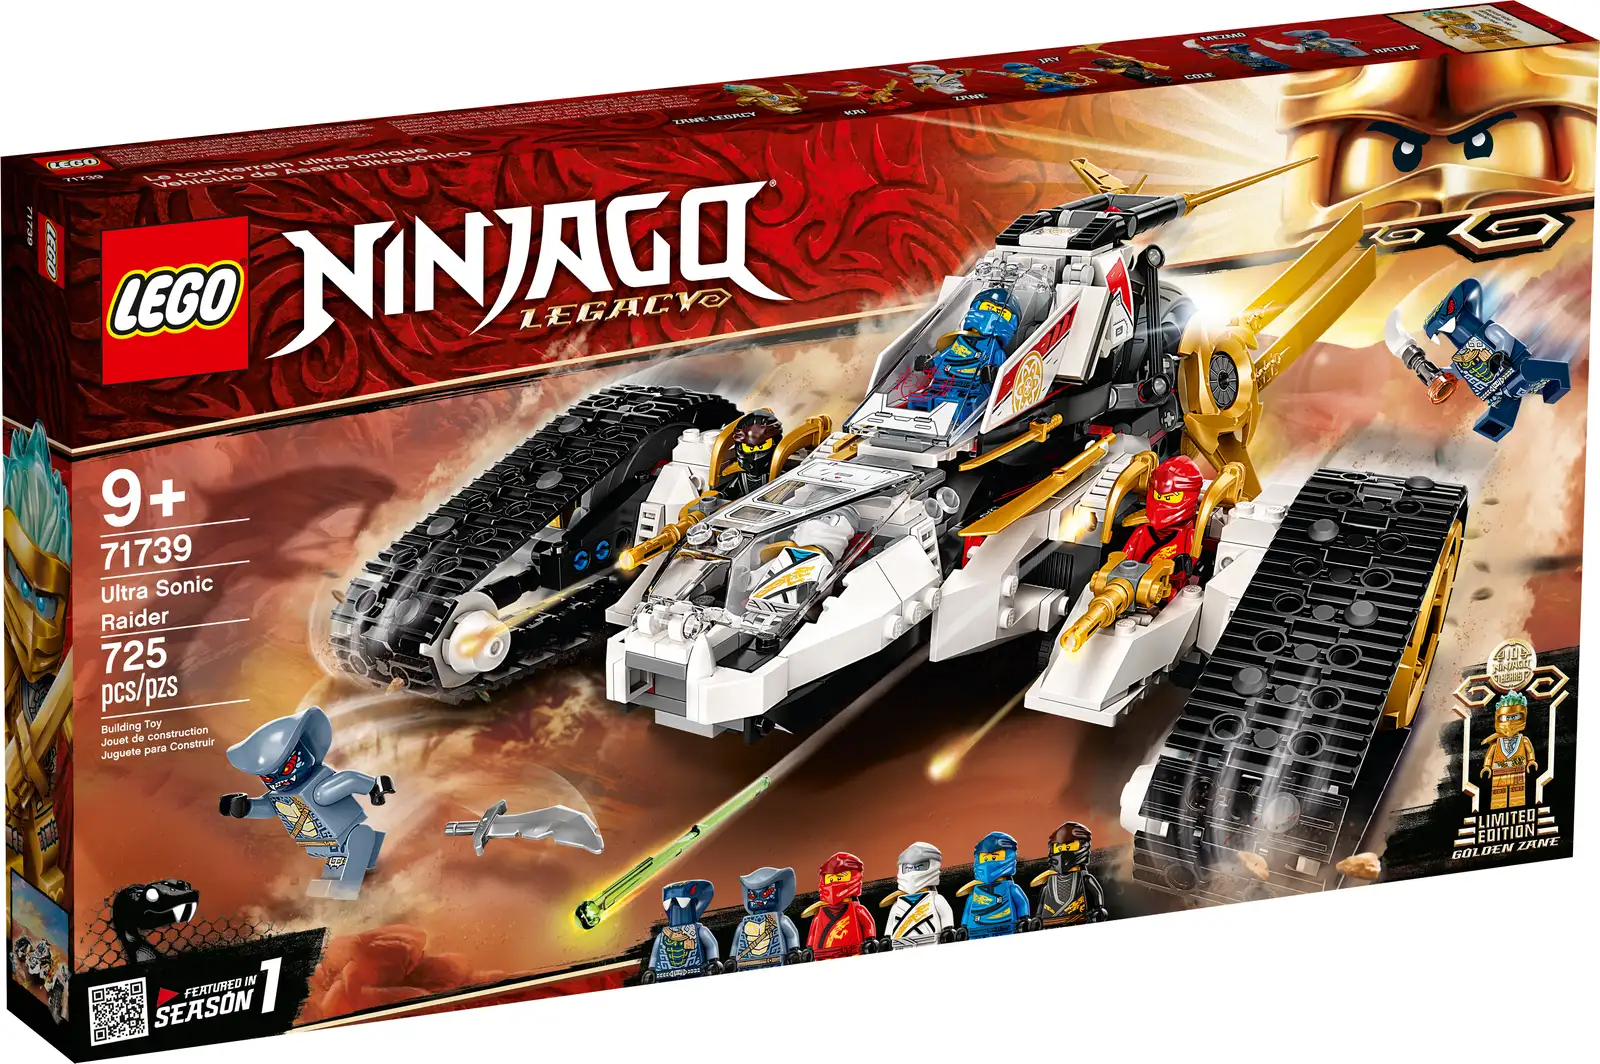 Kids can stage stunning adventures from season 1 of the LEGO® NINJAGO® TV series with this modern update of the Ultra Sonic Raider (71739). The 4-in-1 vehicle can be taken apart to create a separate motorcycle toy, jet plane with spring-loaded shooters and 2 all-terrain vehicles. Toys that let kids fulfil their passion for ninja role play This unique playset includes 7 minifigures: ninjas Kai, Zane, Cole and Jay, plus snake soldiers Mezmo and Rattla from the Hypnobrai tribe, giving kids allthey need to stage gripping battles. New for June 2021, there is also a never-seen-before Zane Legacy golden collectible minifigure with a stand to celebrate 10 years of NINJAGO toys. Fantastic LEGO sets for creative play LEGO NINJAGO playsets transport kids to a world of fun-filled adventure. There they can join their brave heroes to take on the forces of evil as they play with an amazing collection of cool toys including dragons, mechs and so much more. LEGO® NINJAGO® Ultra Sonic Raider (71739) is a unique 4-in-1 ninja vehicle that separates into a jet plane, a motorcycle toy and 2 all-terrain vehicles, so the fun never stops. Action-packed playset includes 7 minifigures: ninjas Kai, Cole, Zane, Jay and Zane Legacy to take on snake soldiers Rattla and Mezmo from season 1 of the NINJAGO® TV series. Kids have the exciting choice to fly the jet plane with spring-loaded shooters or drive the motorcycle toy or 2 all-terrain vehicles. There is space in each of the 4 vehicles for a ninja minifigure. Includes a golden Zane Legacy collectible minifigure with a small stand to celebrate the 10th anniversary of NINJAGO® toys. Look out for more special golden minifigures in 5 other NINJAGO® sets including Tournament of Elements (71735), Boulder Blaster (71736), Fire Dragon Attack (71753) and X-1 Ninja Charger (71737). This battle toy playset for ages 9 and up offers creative kids a truly enriching building task and makes a great birthday or holiday gift. The Ultra Sonic Raider measures over 5.5 in. (14 cm) high, 13 in. (33 cm) long and 10.5 in. (27 cm) wide – just the right size to play out stories at home or for fun on the go. The LEGO® NINJAGO® range has an extensive collection of action-packed playsets to fuel your kid’s passions and lets them learn the positive ninja values of bravery, honesty and friendship. For more than 6 decades LEGO® bricks have been made from high-quality materials to ensure they consistently connect and pull apart – ninja skills not needed! LEGO® building bricks meet rigorous safety standards, ensuring your kids are in safe hands with LEGO playsets.